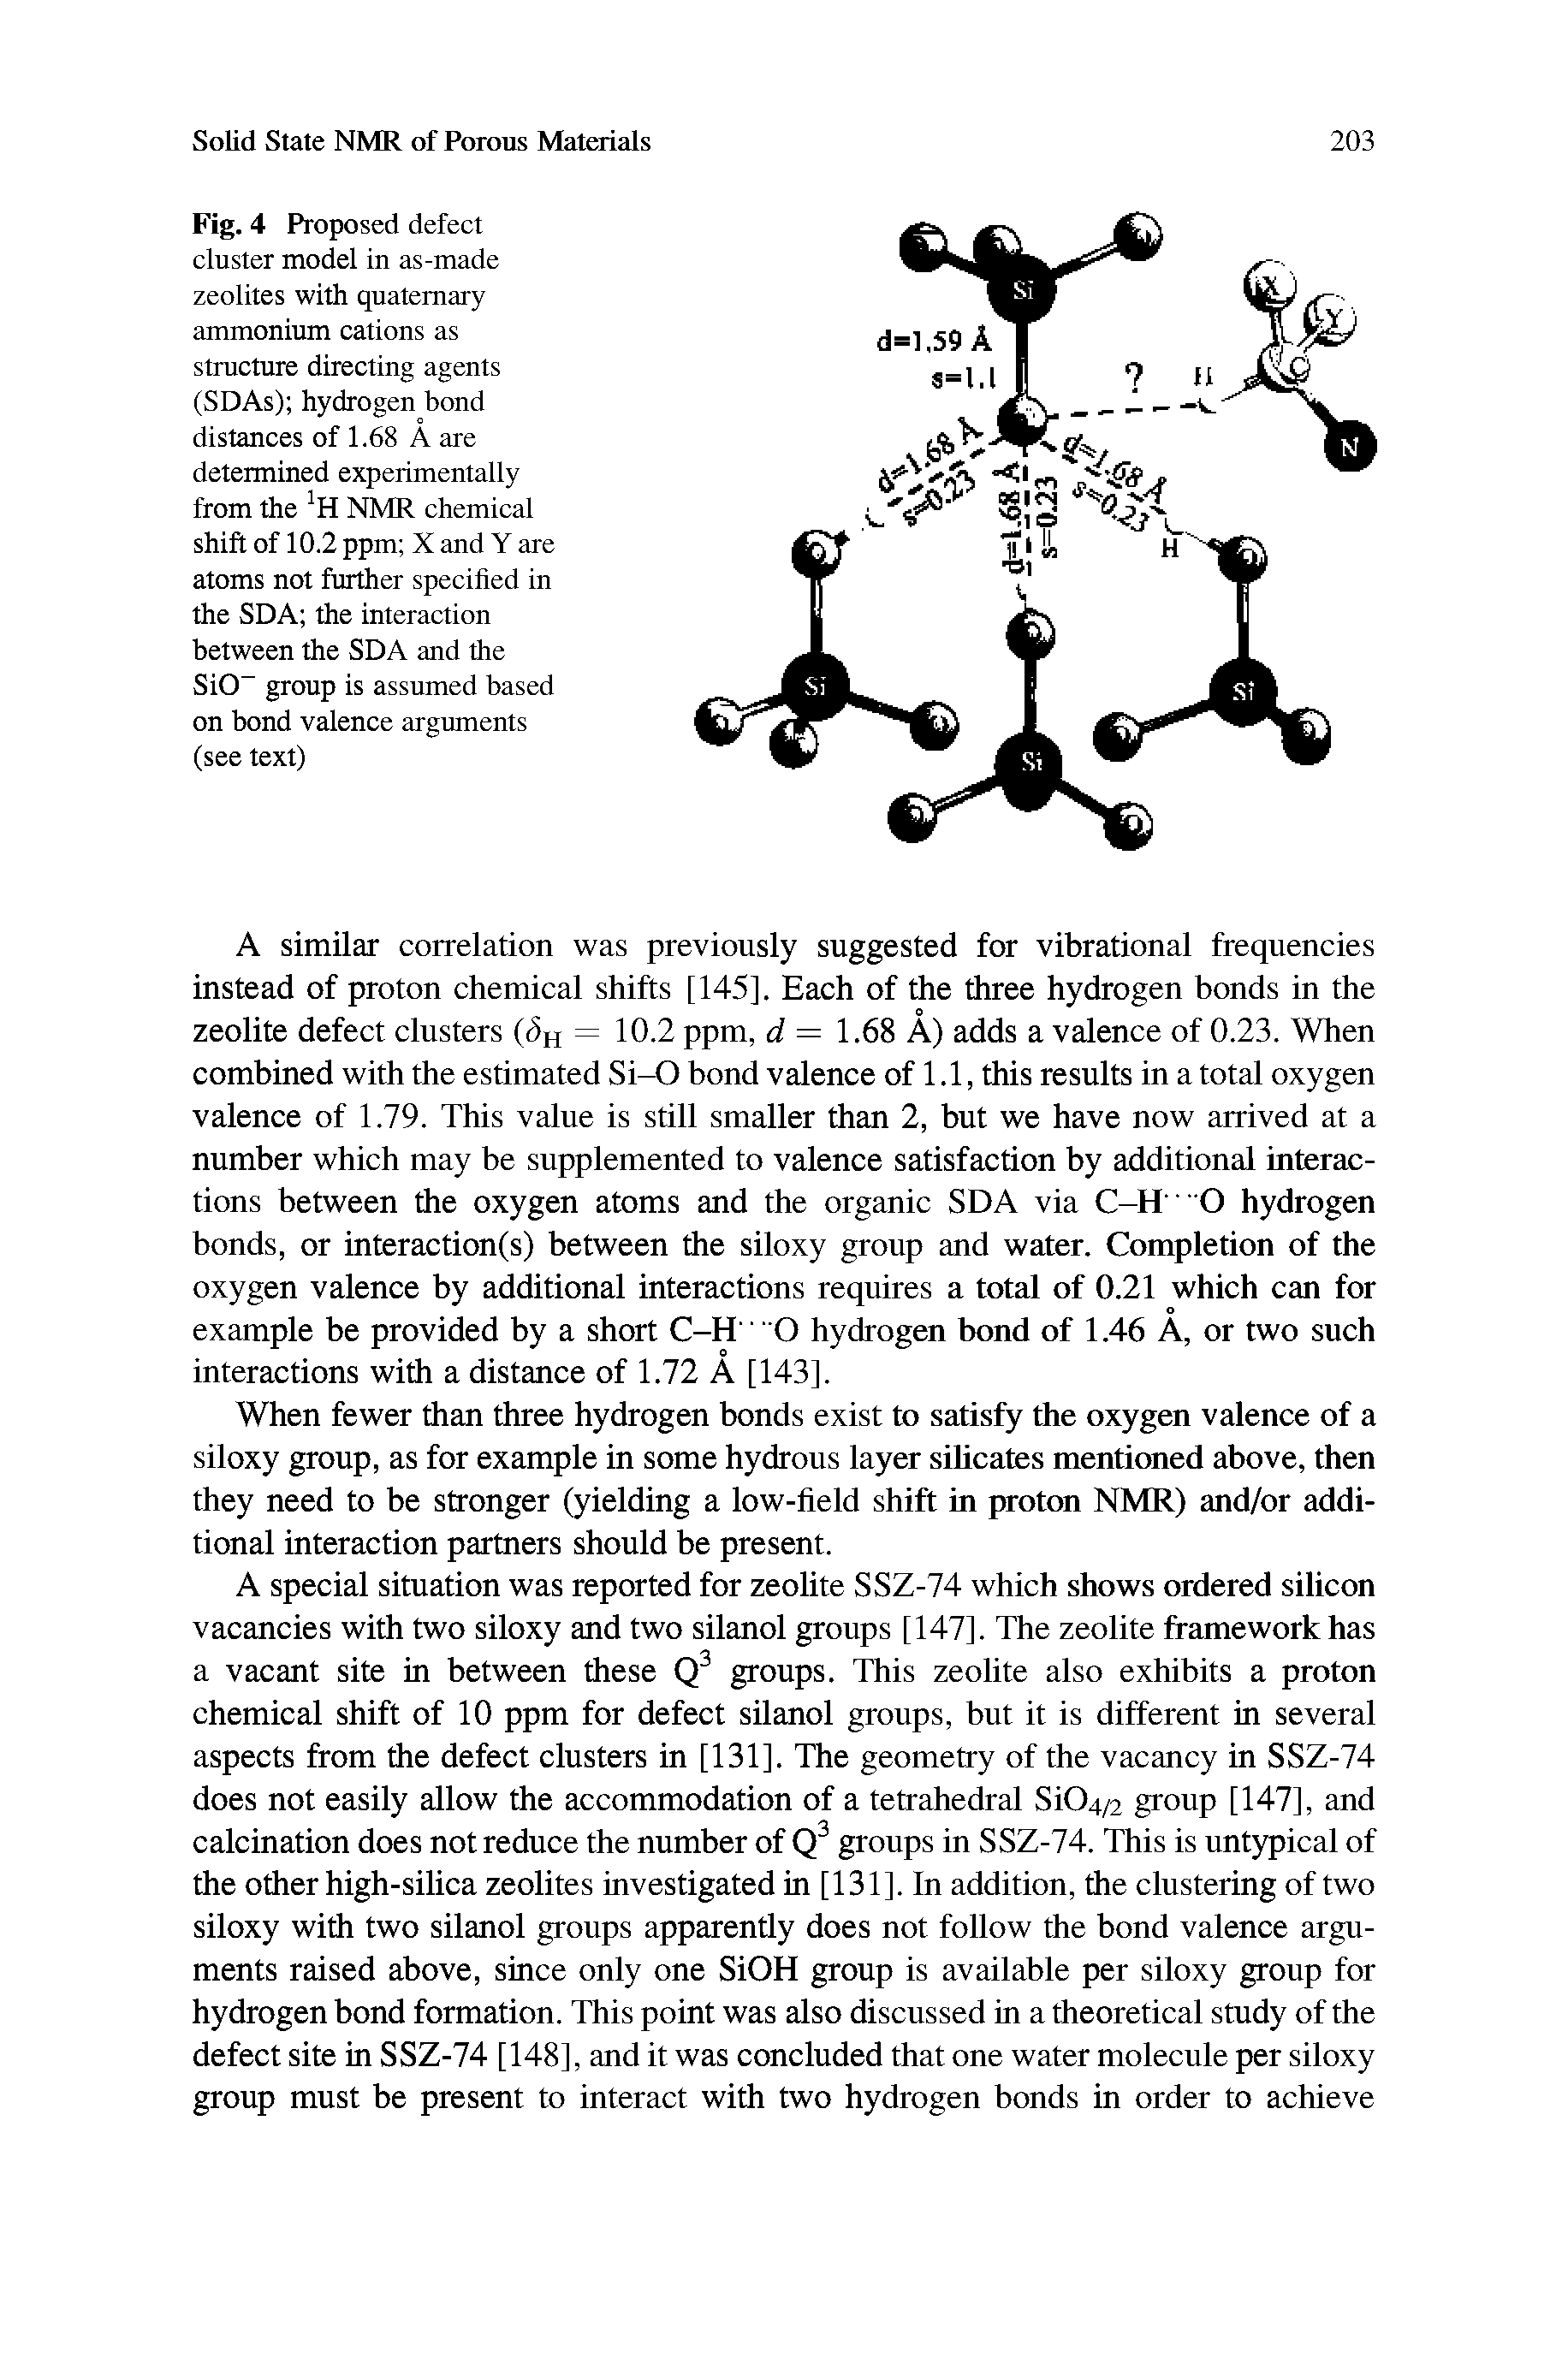 Fig. 4 Proposed defect cluster model in as-made zeolites with quaternary ammonium cations as structure directing agents (SDAs) hydrogen bond distances of 1.68 A are determined experimentally from the H NMR chemical shift of 10.2 ppm X and Y are atoms not further specified in the SDA the interaction between the SDA and the SiO- group is assumed based on bond valence arguments (see text)...